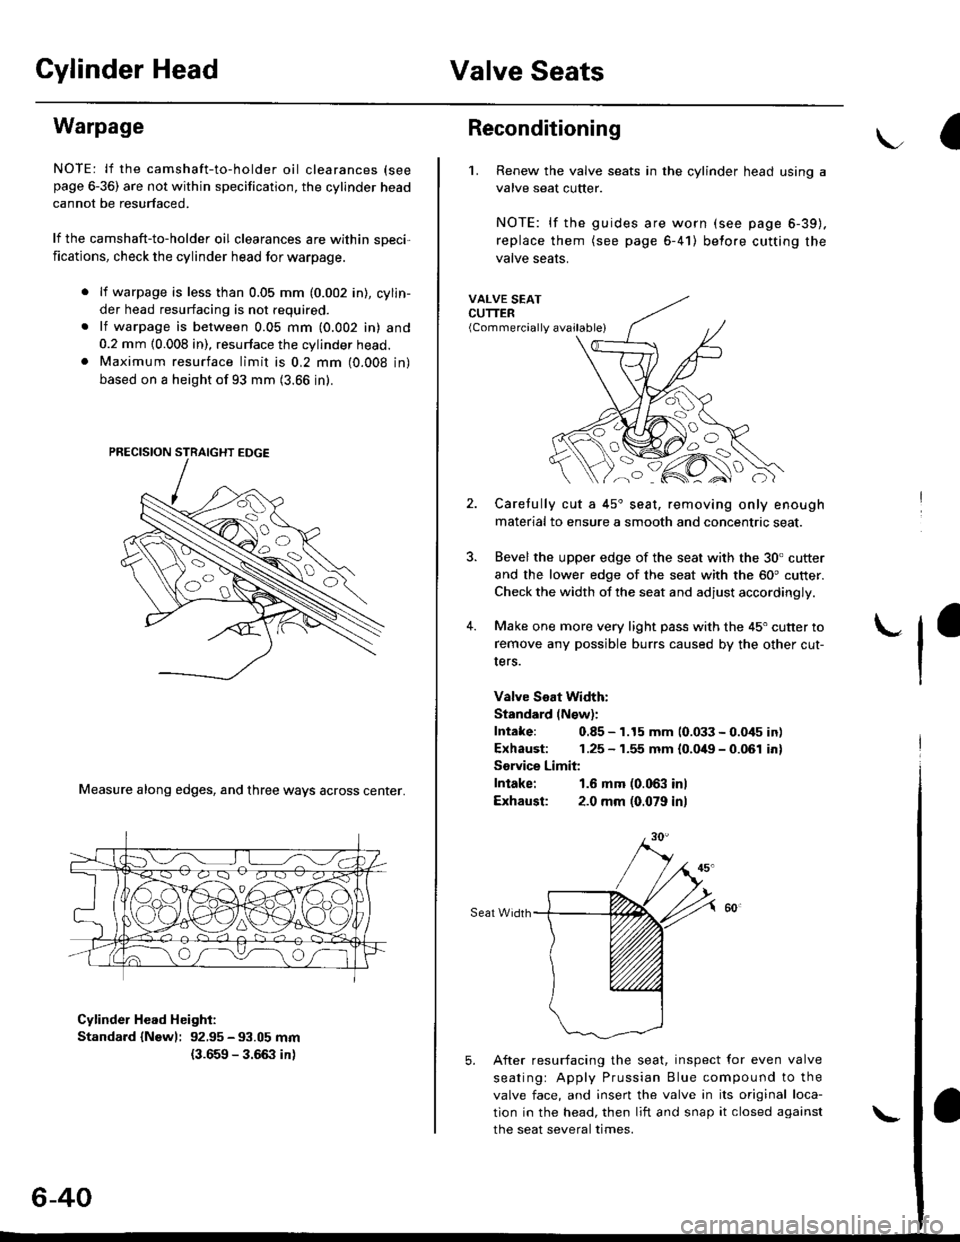 HONDA CIVIC 1997 6.G Workshop Manual Cylinder HeadValve Seats
Warpage
NOTE: lf the camshaft-to-holder oil clearances (see
page 6-36) are not within specification, the cylinder head
cannot be resurfaced.
lf the camshaft-to-holder oil clea